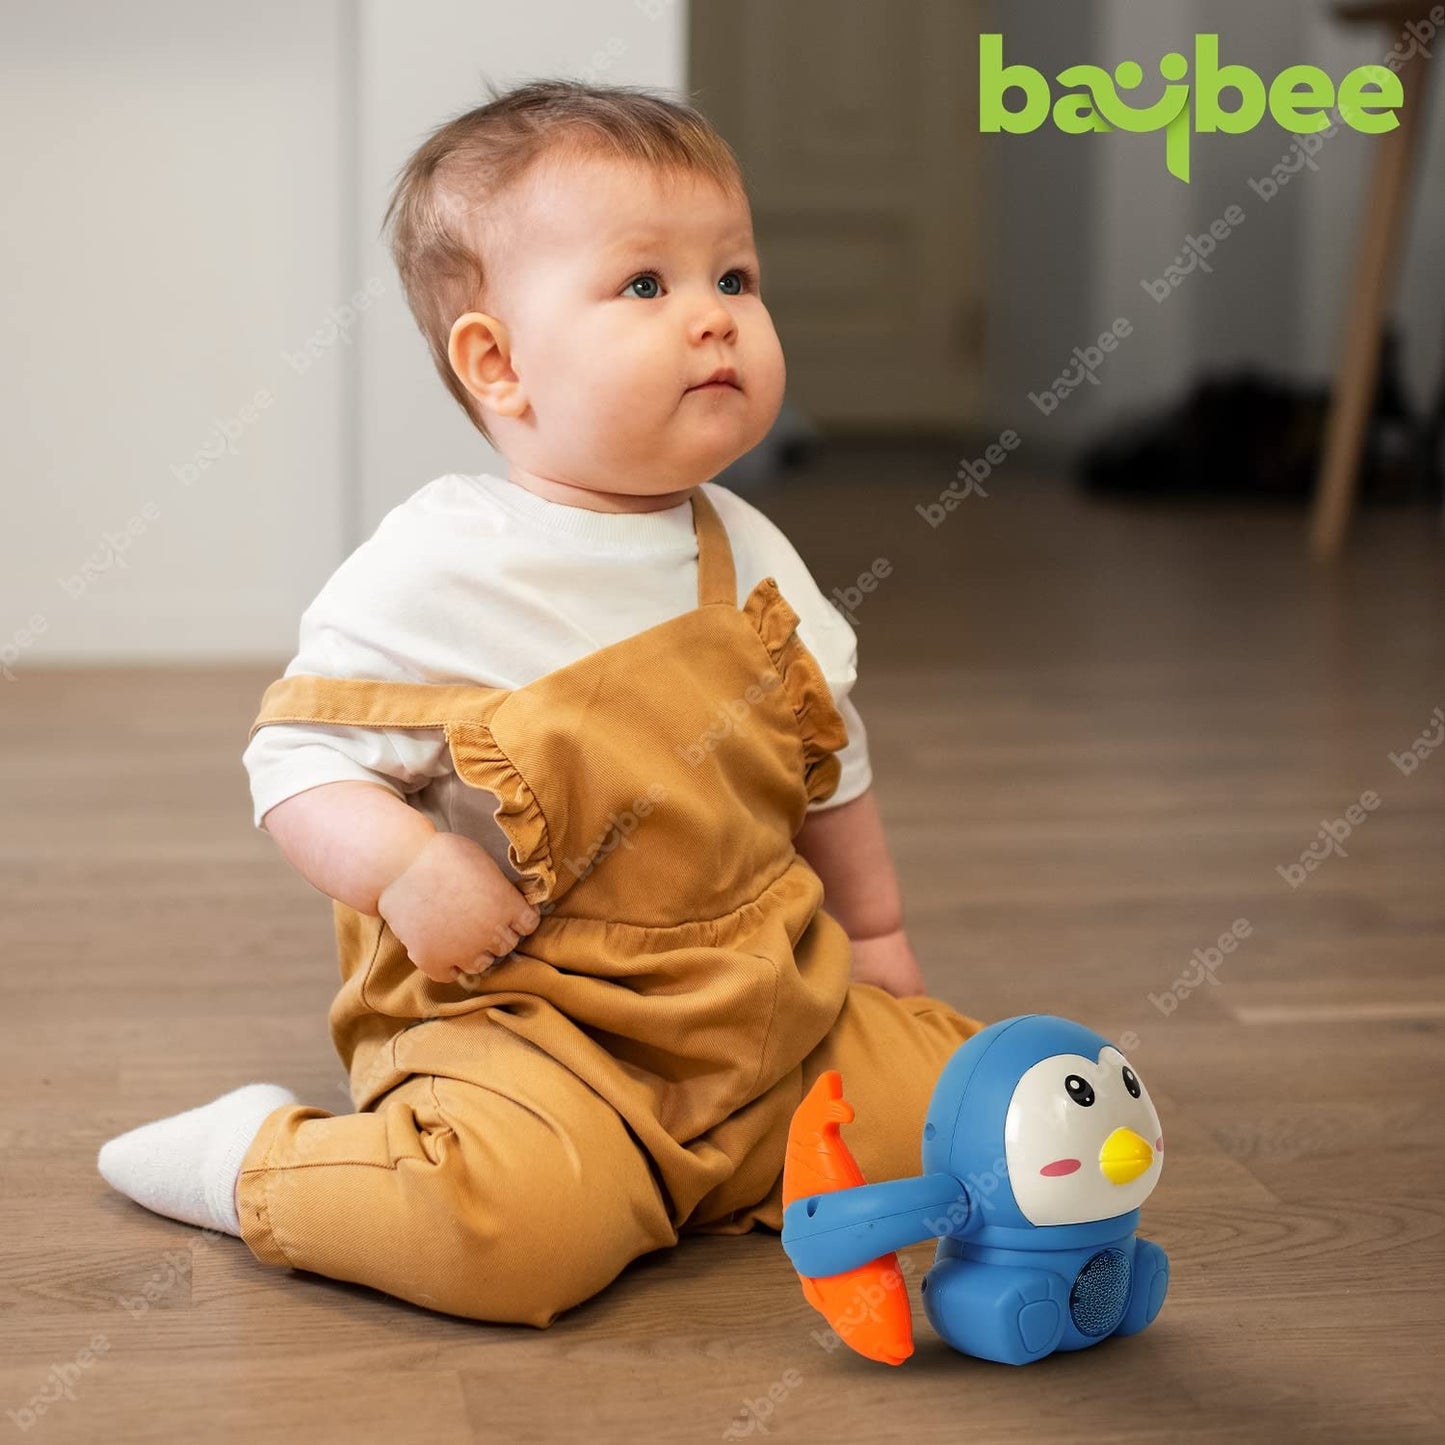 Baybee Tumbling Penguin Musical Toys for Baby Kids, Crawling Toys